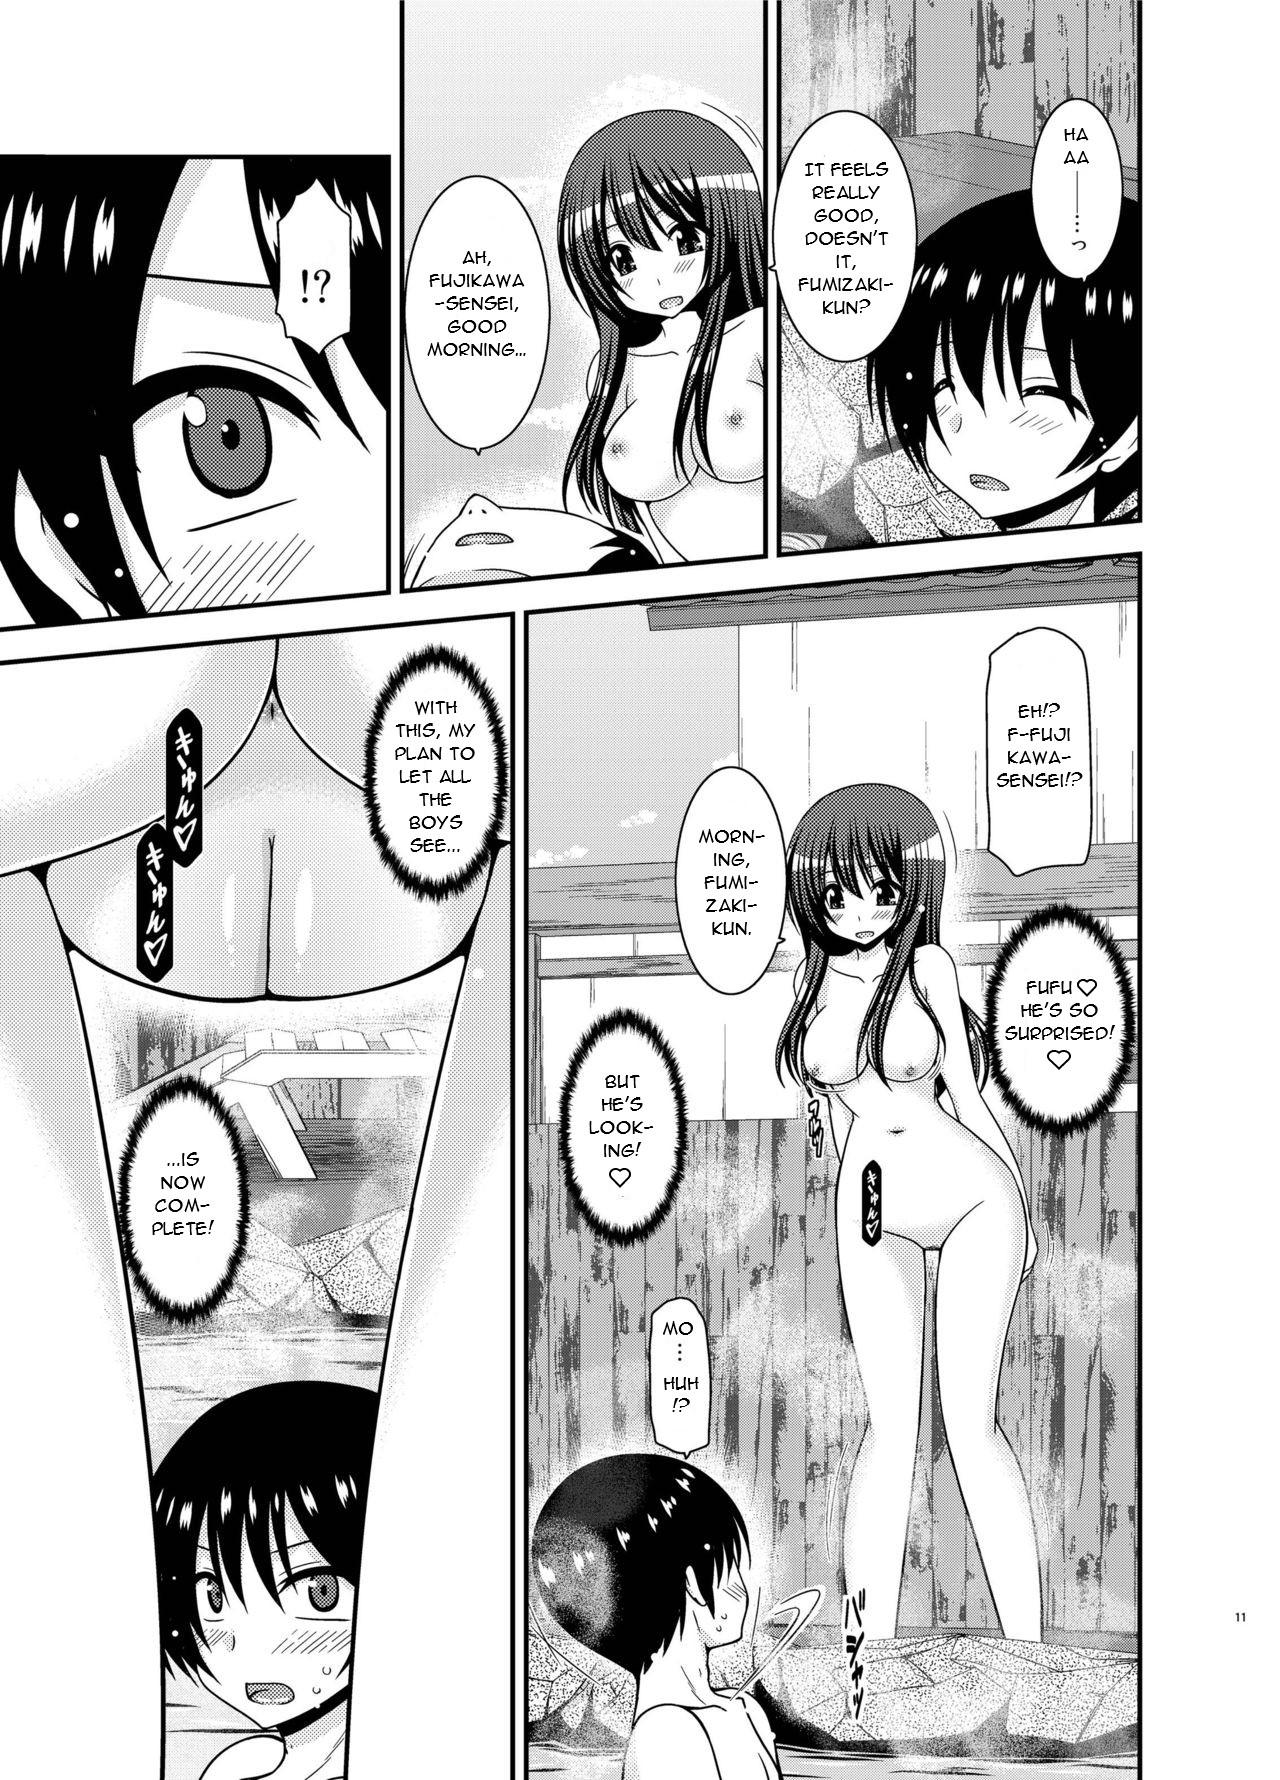 Gay Baitbus Roshutsu Shoujo Nikki 21 Satsume | Exhibitionist Girl Diary Chapter 21 Best Blowjobs Ever - Page 11